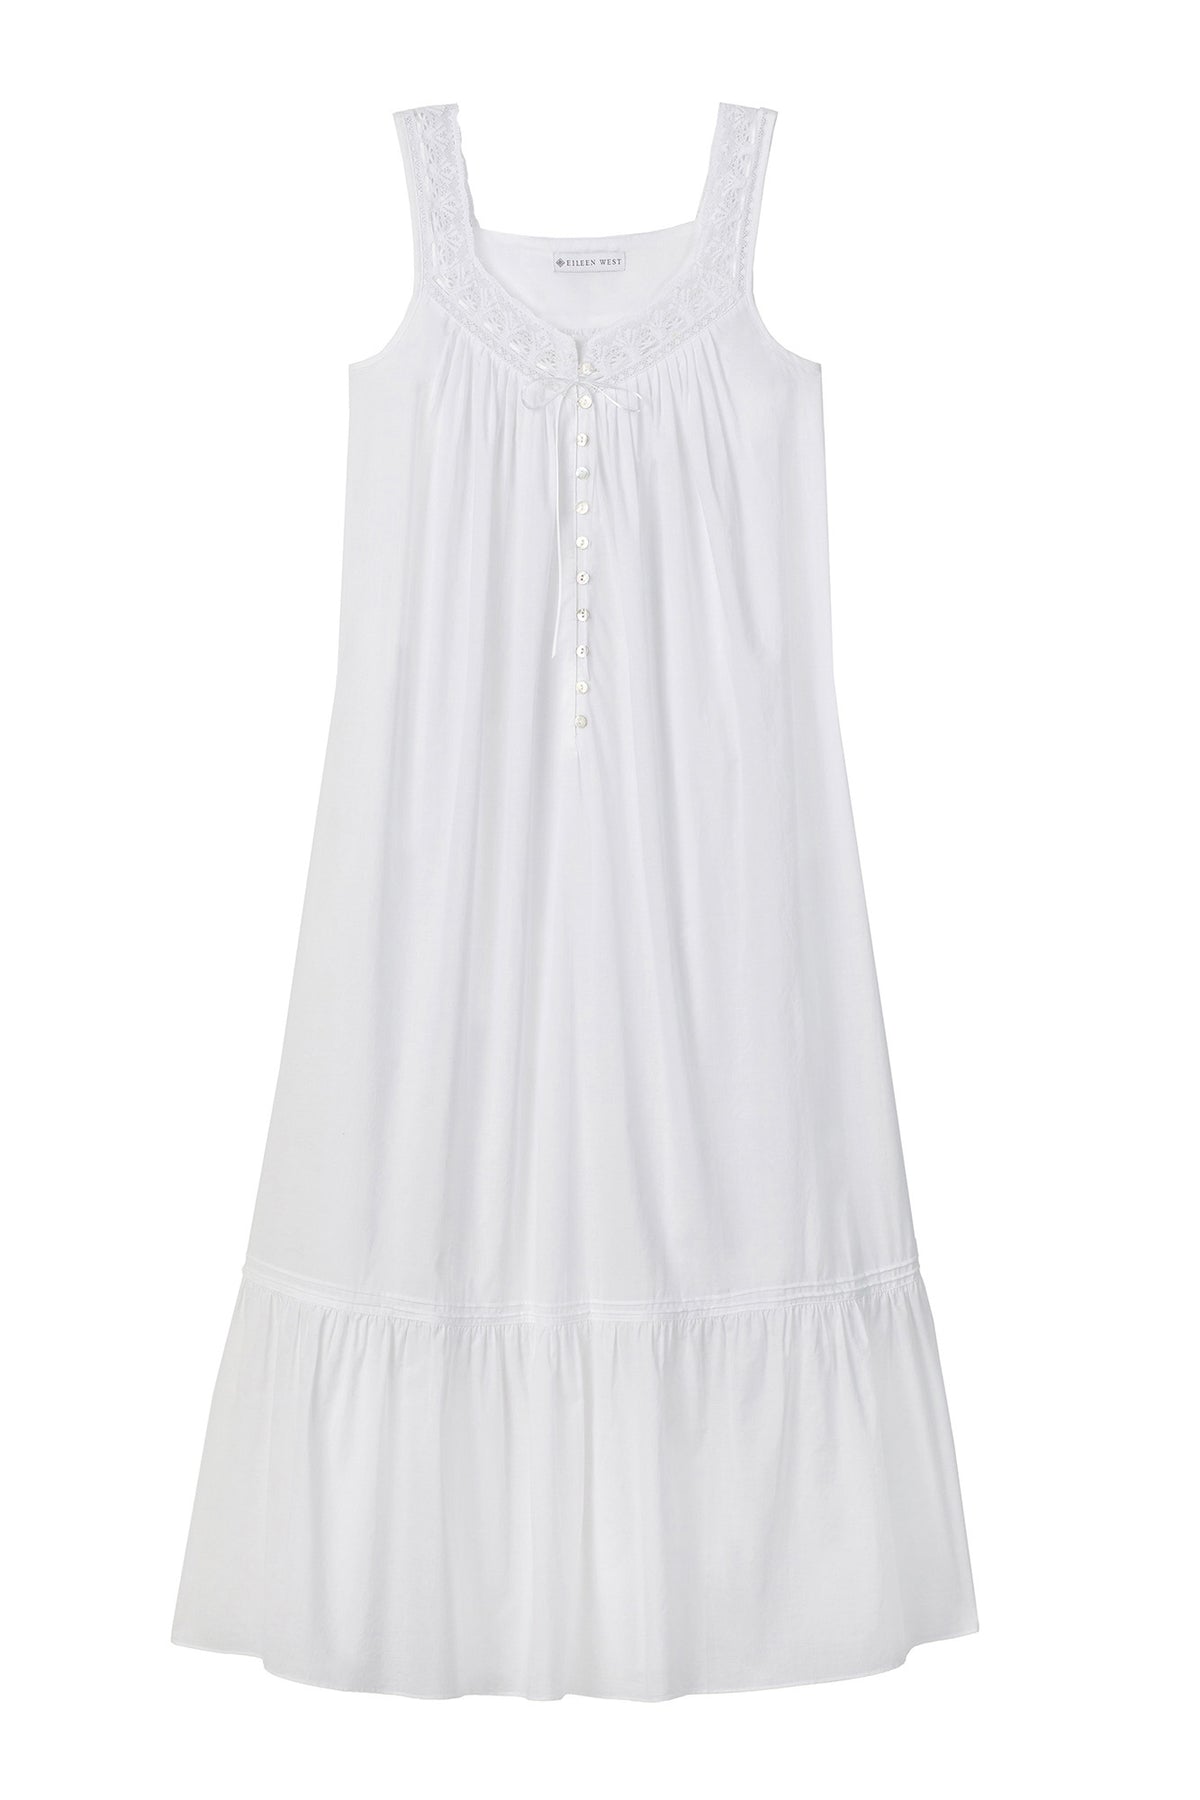 A lady wearing white sleeveless elizabeth cotton nightgown with iconic pattern.